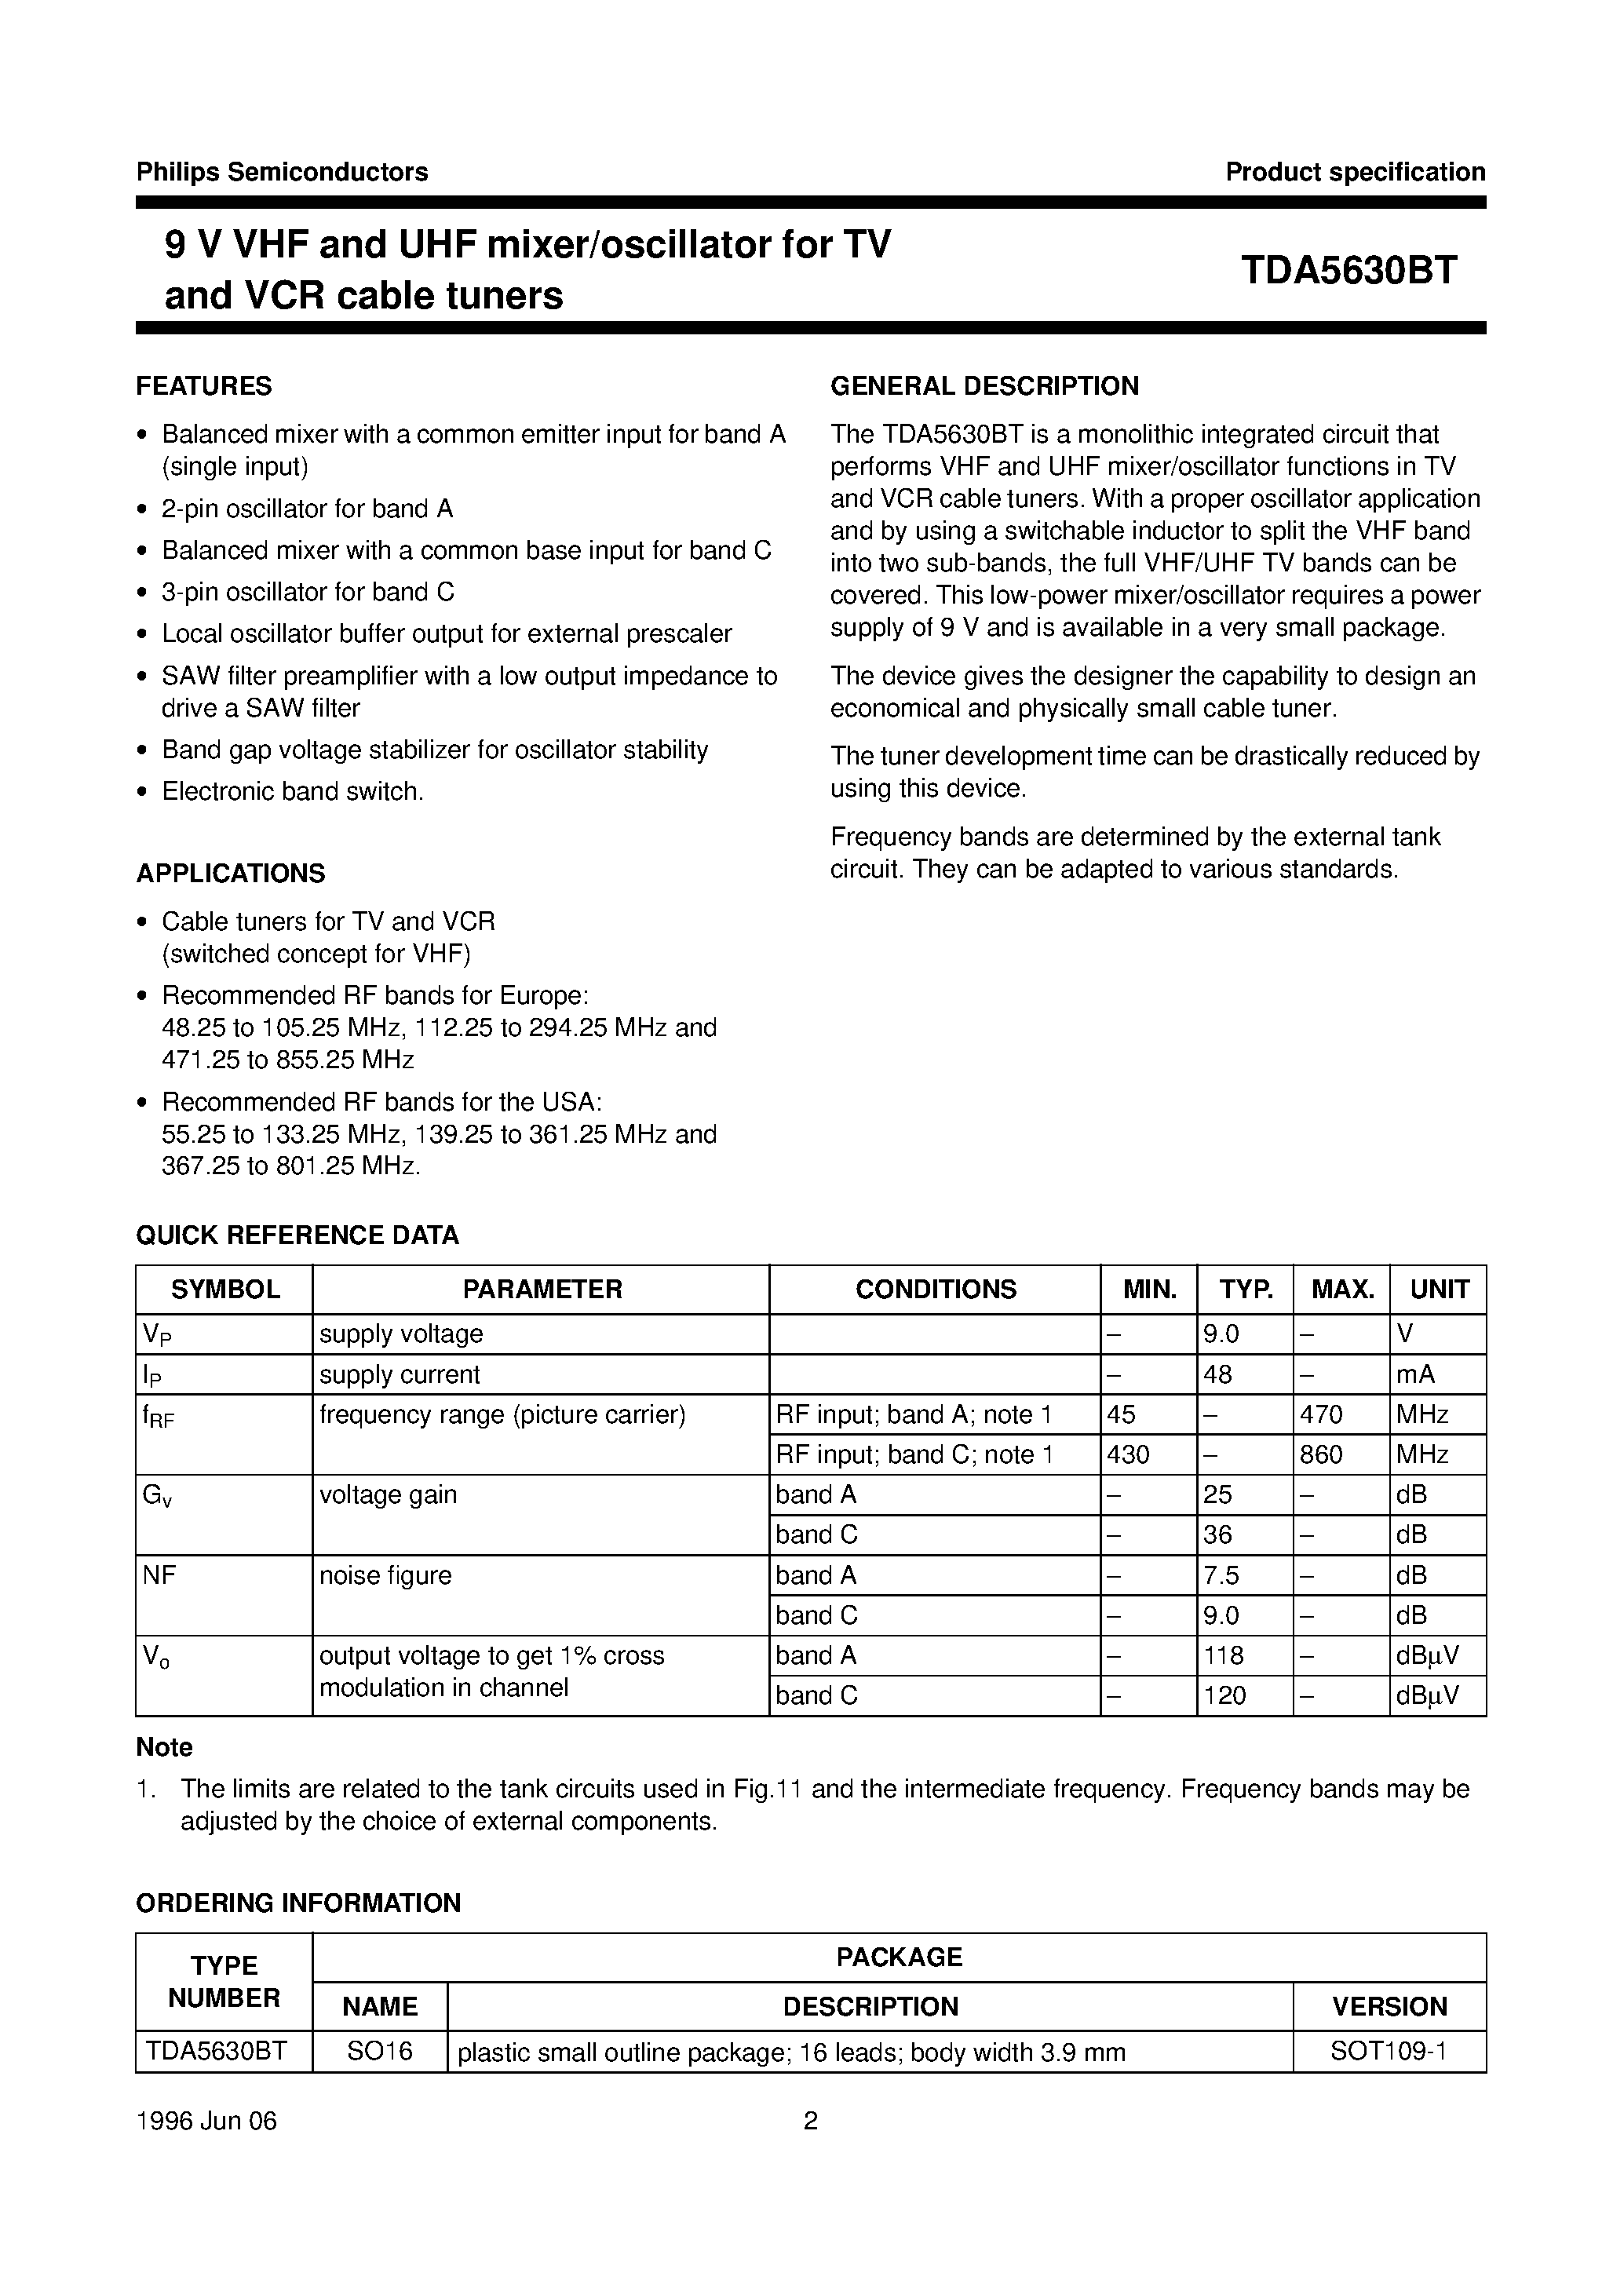 Datasheet TDA5630BT - 9 V VHF and UHF mixer/oscillator for TV and VCR cable tuners page 2